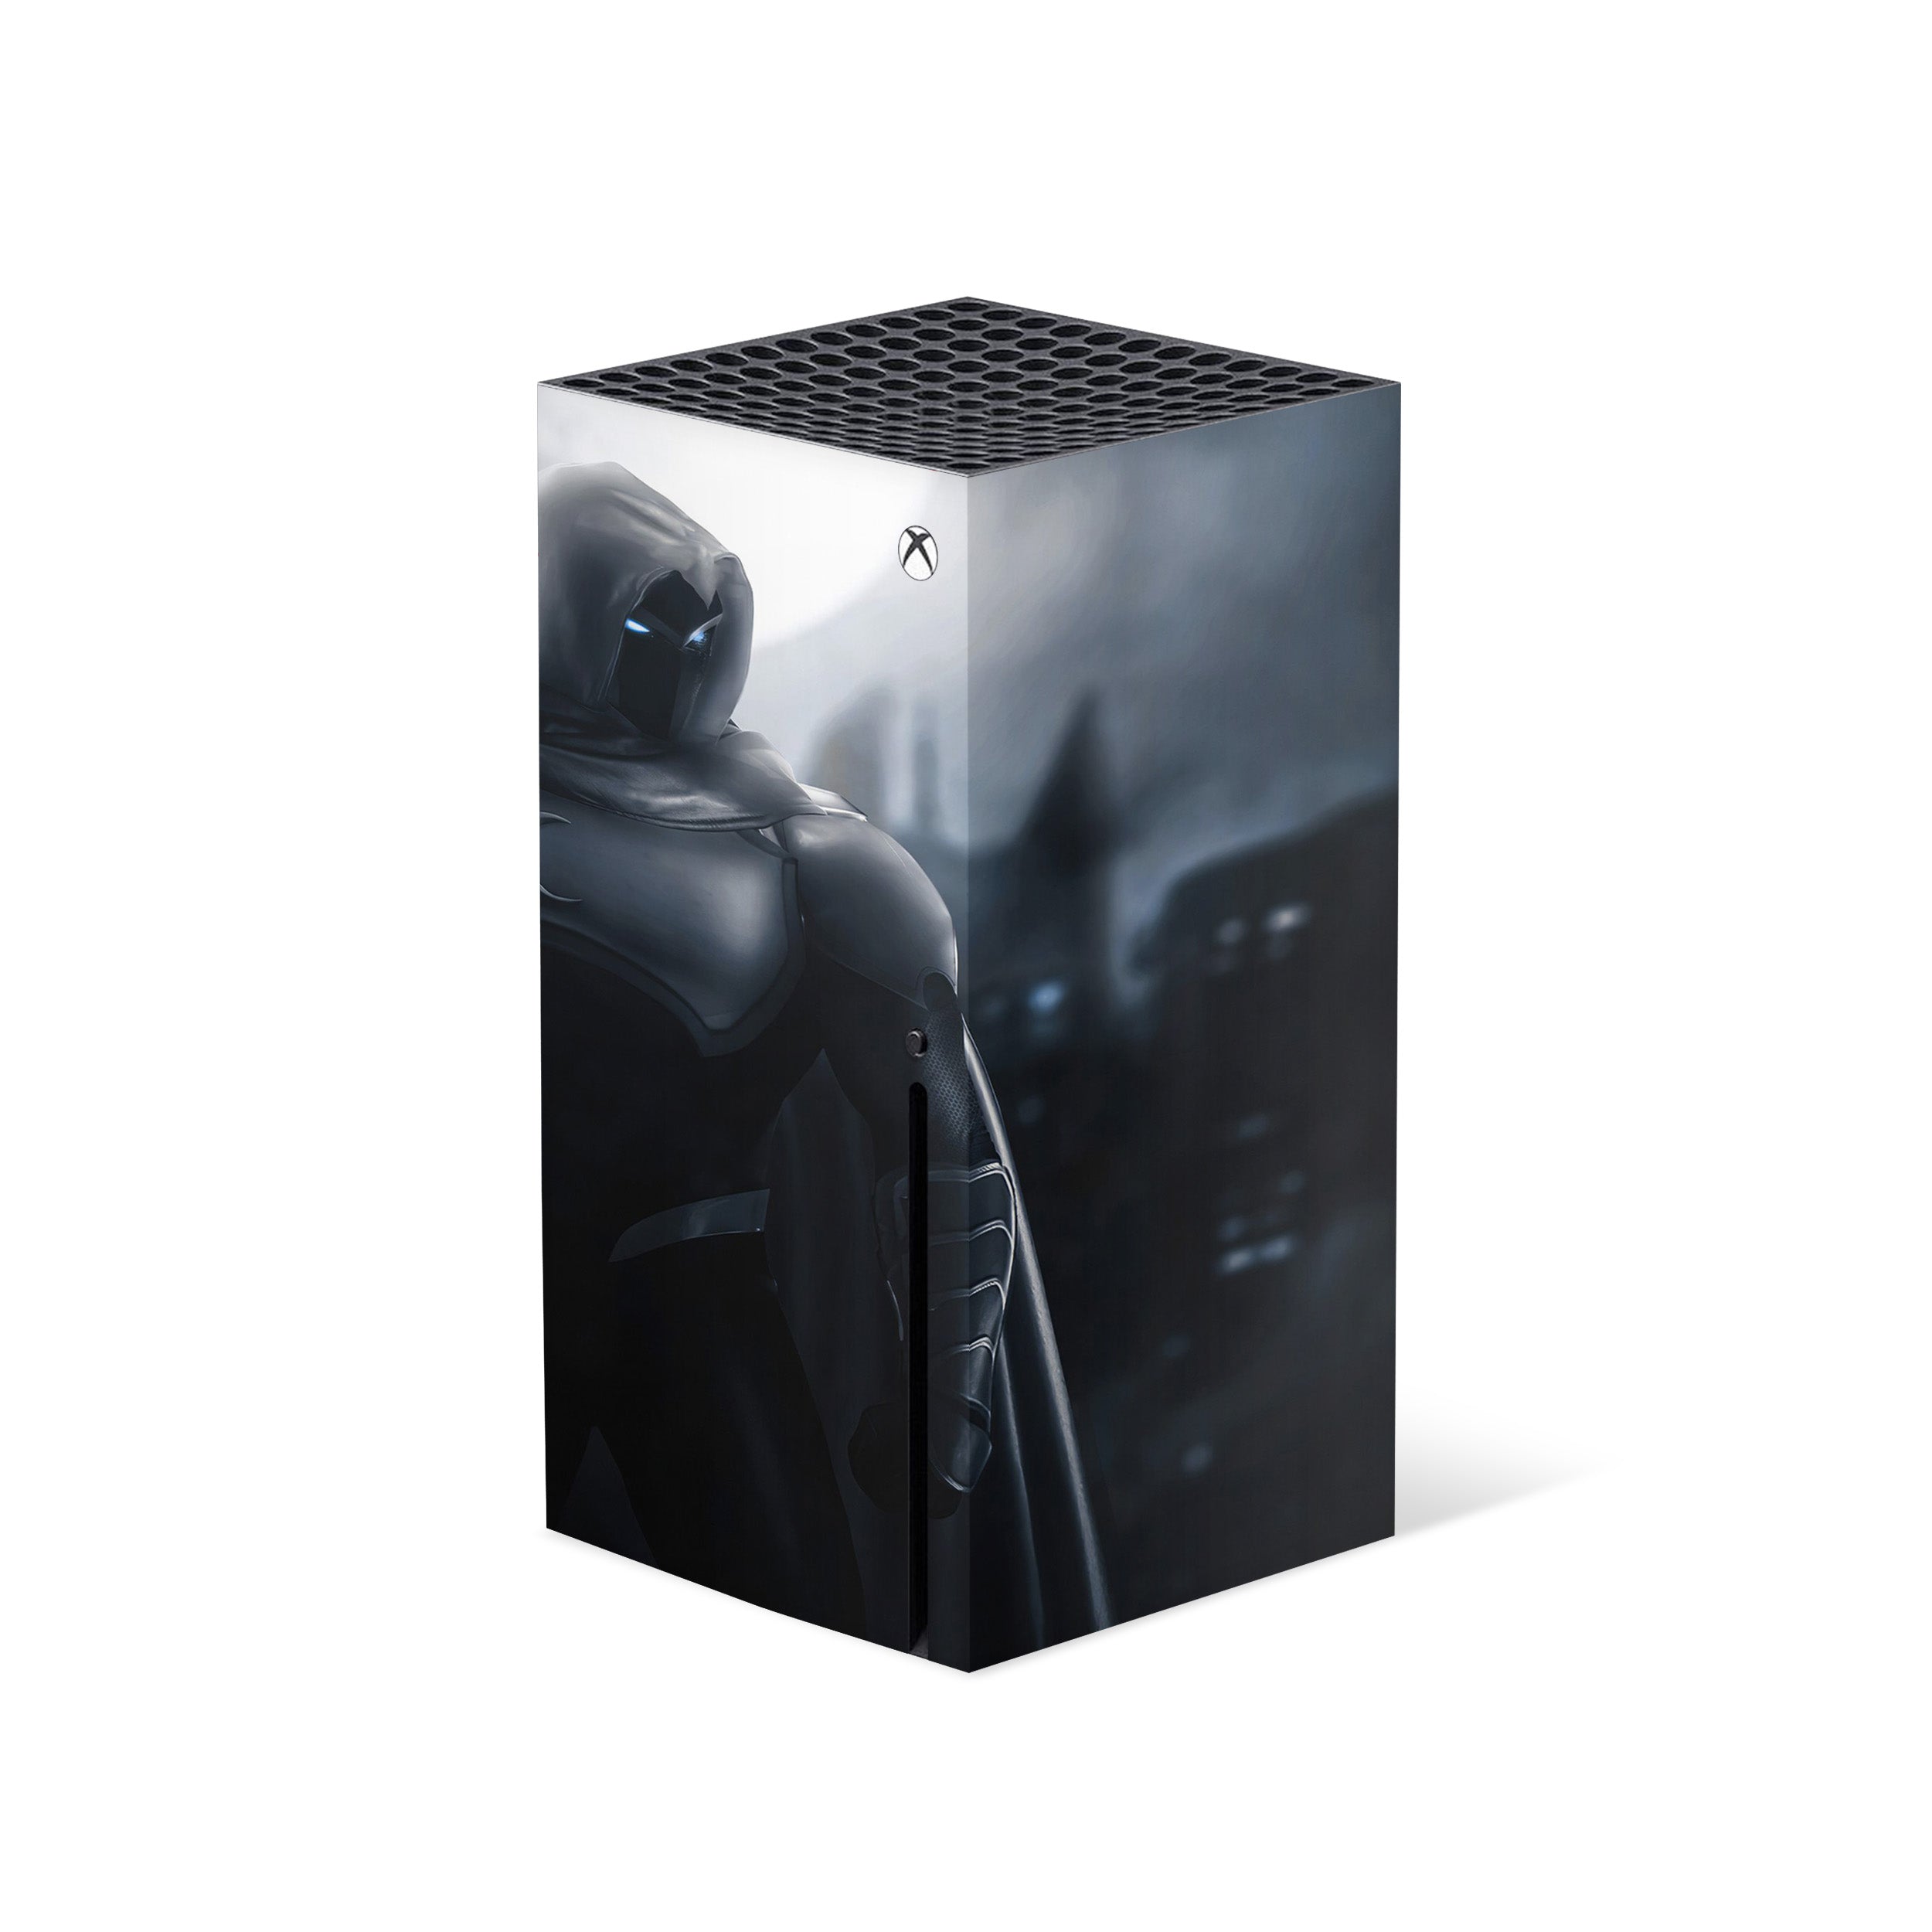 A video game skin featuring a Marvel Comics Moon Knight design for the Xbox Series X.